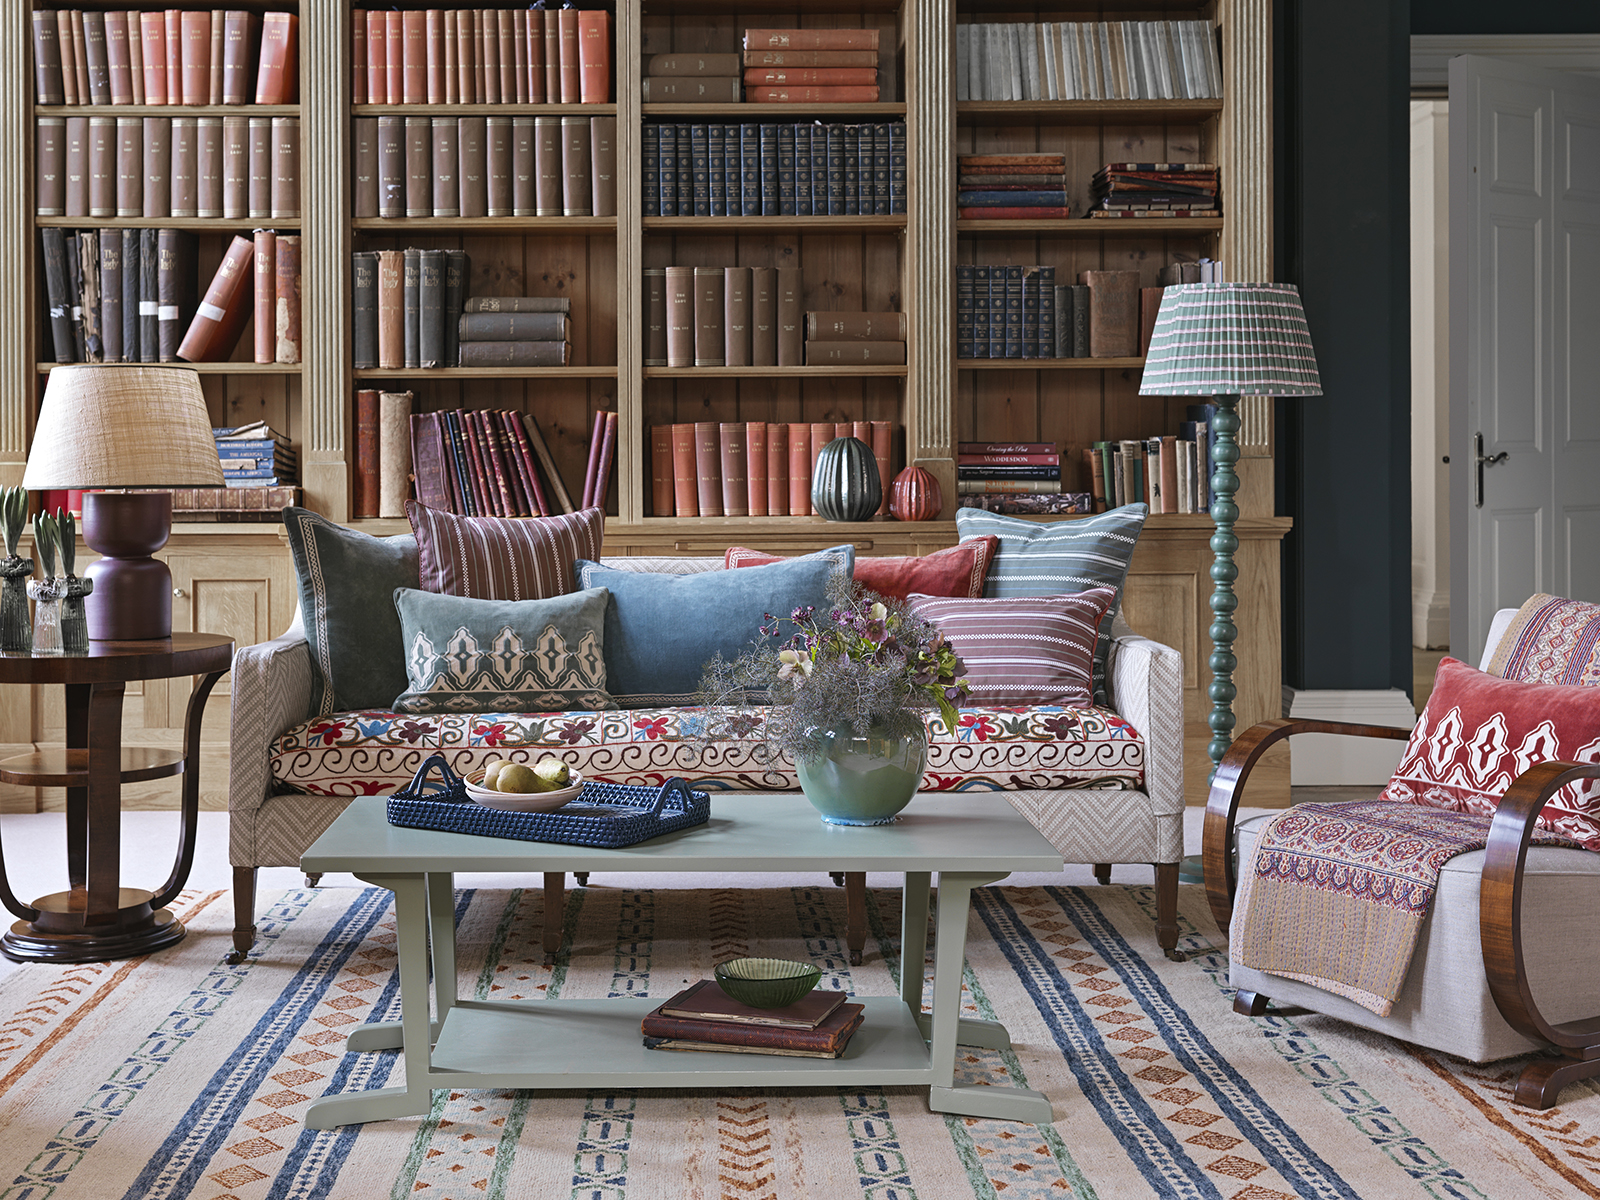 A sofa covered in cushions and a coffee table in front of book cases